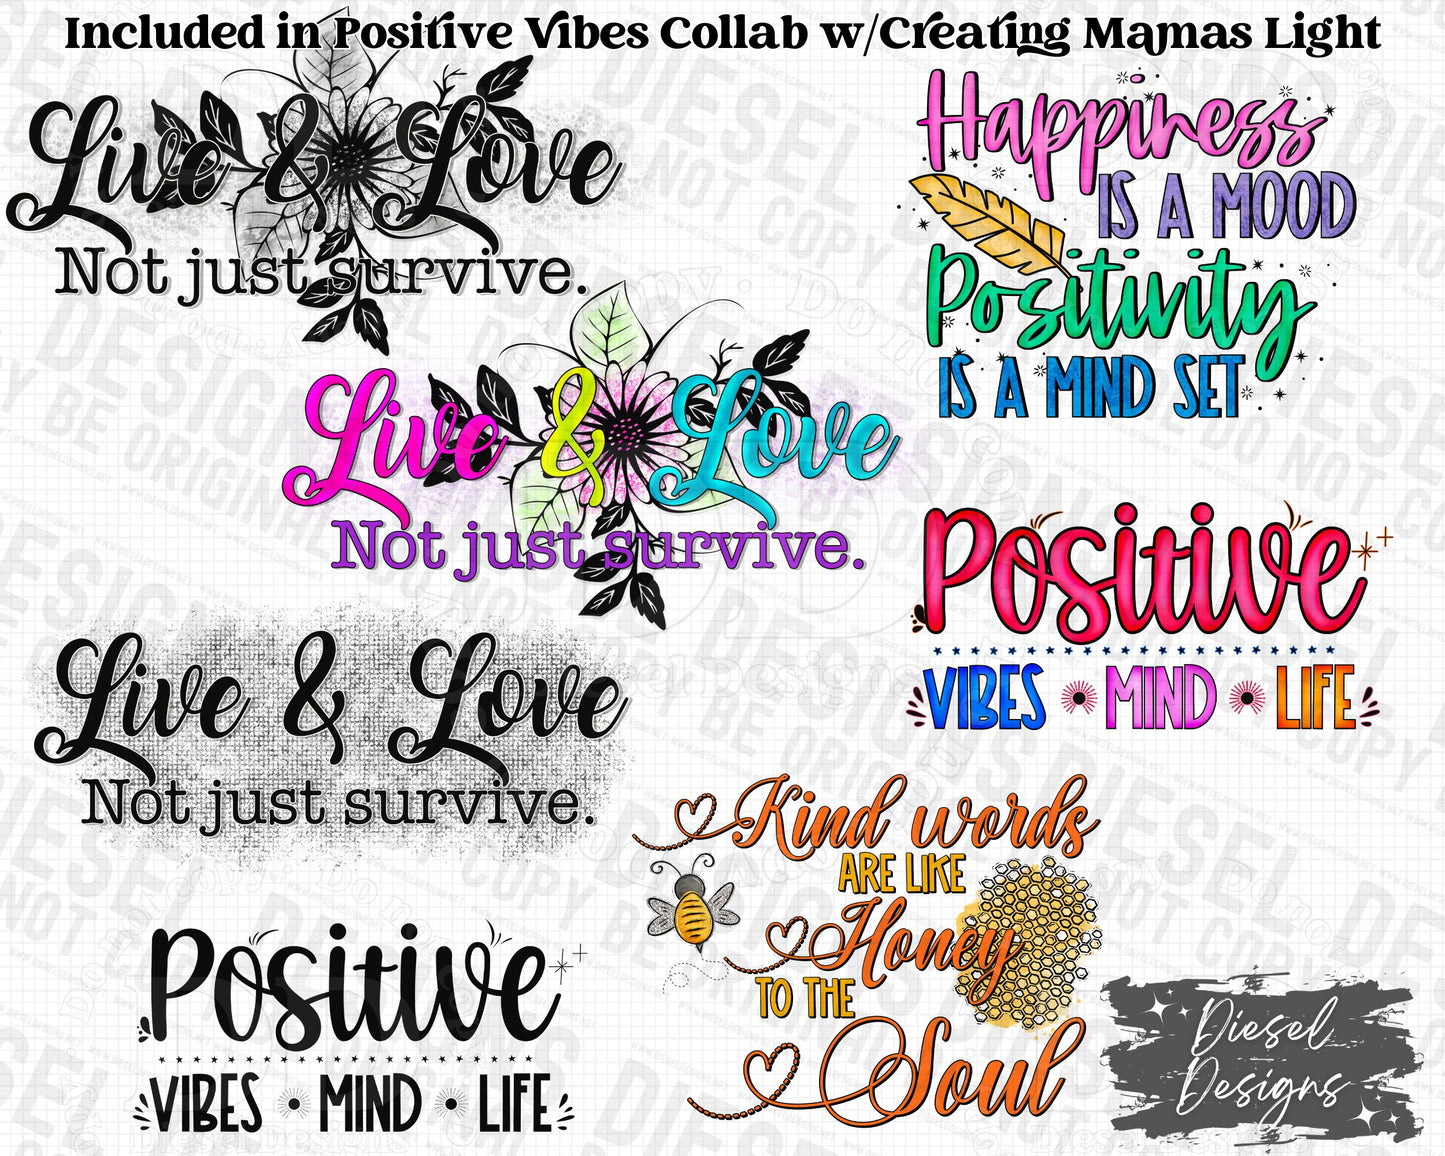 Positive Vibes with Diesel Designs &  Creating Mama's Lights| 300 DPI | PNG | Seamless | Tumbler Wraps | Collab |